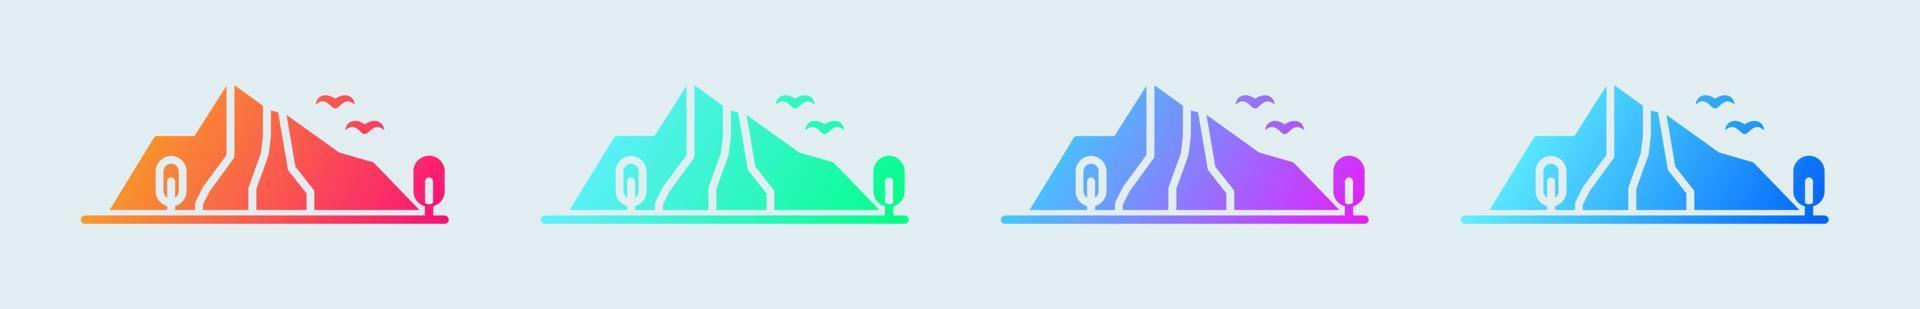 Mountain solid icon in gradient colors. Adventure signs vector illustration.